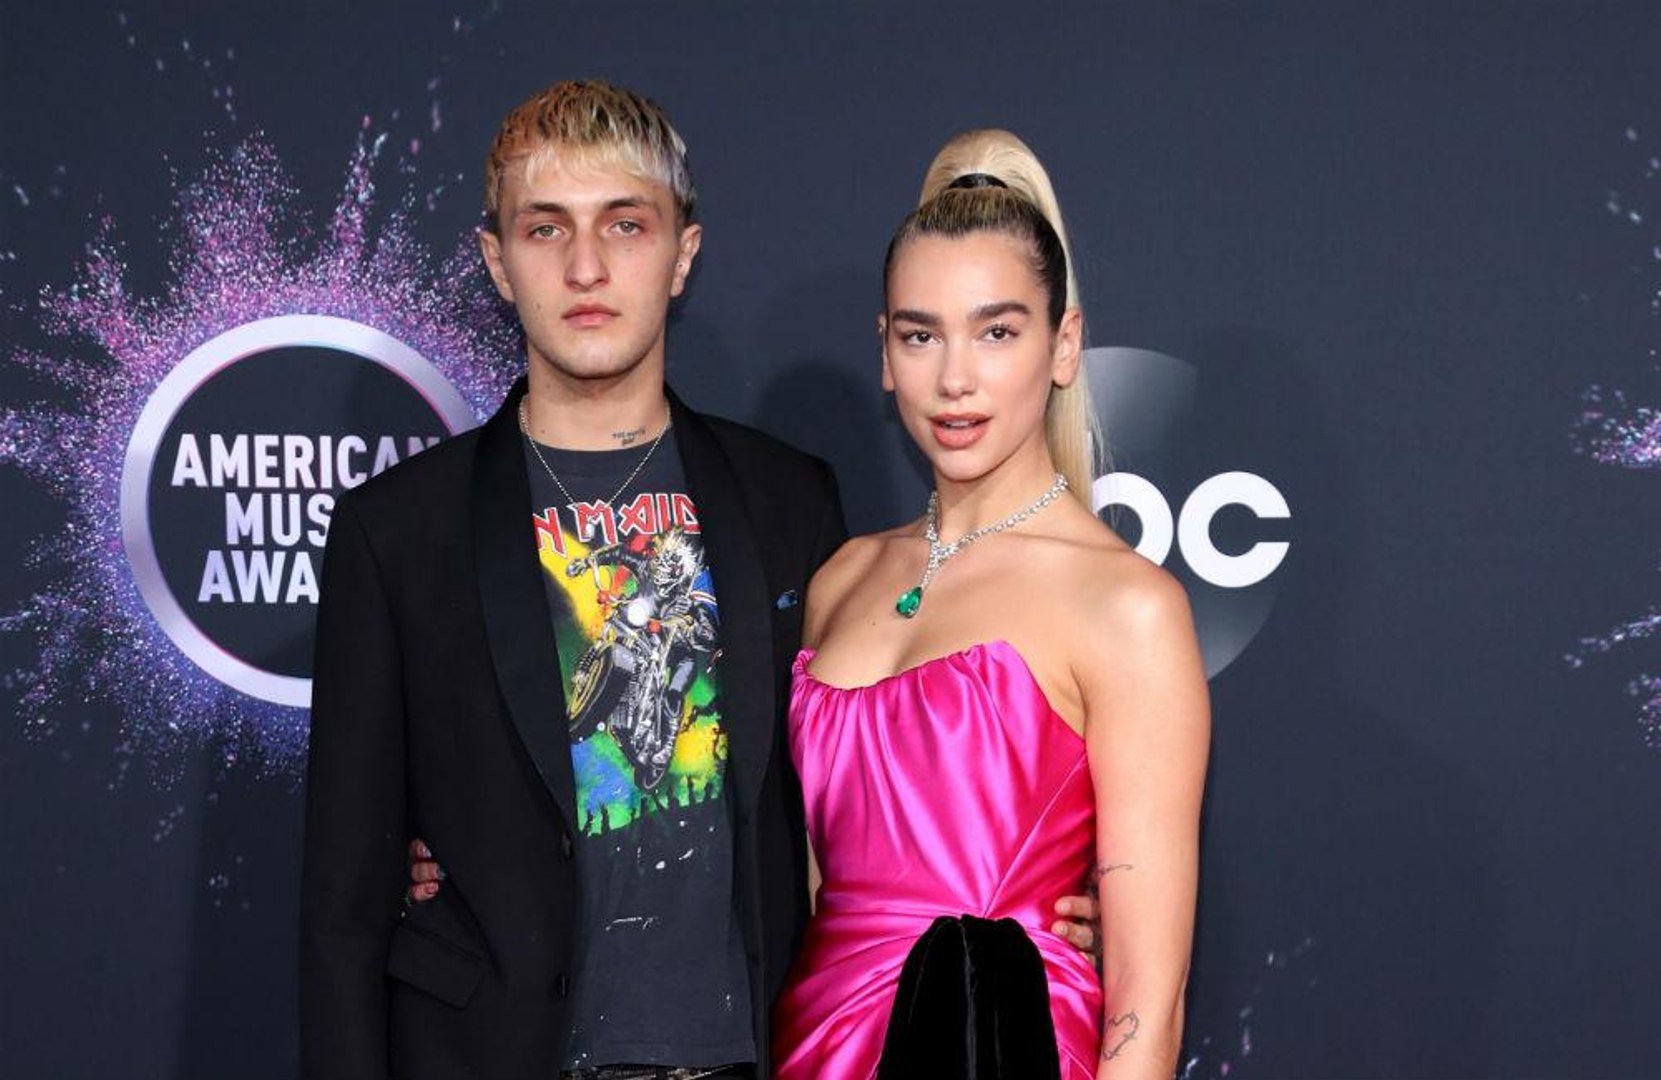 ⁣'Auntie' Dua Lipa 'very excited' about Gigi Hadid's baby